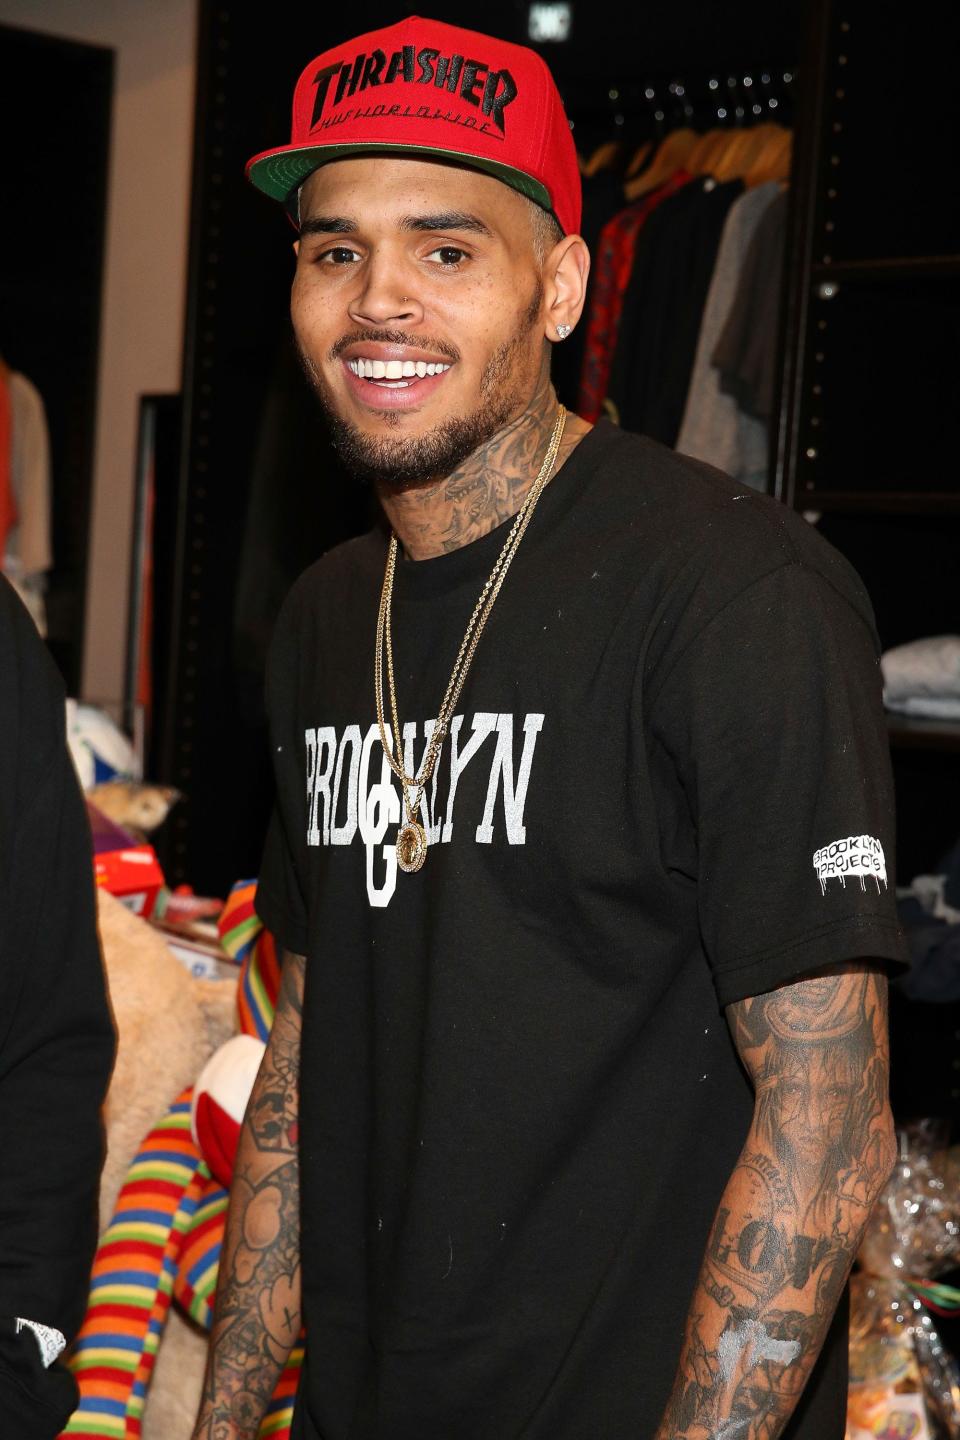 Chris Brown is sorry for being a sore loser at the Grammy Awards.